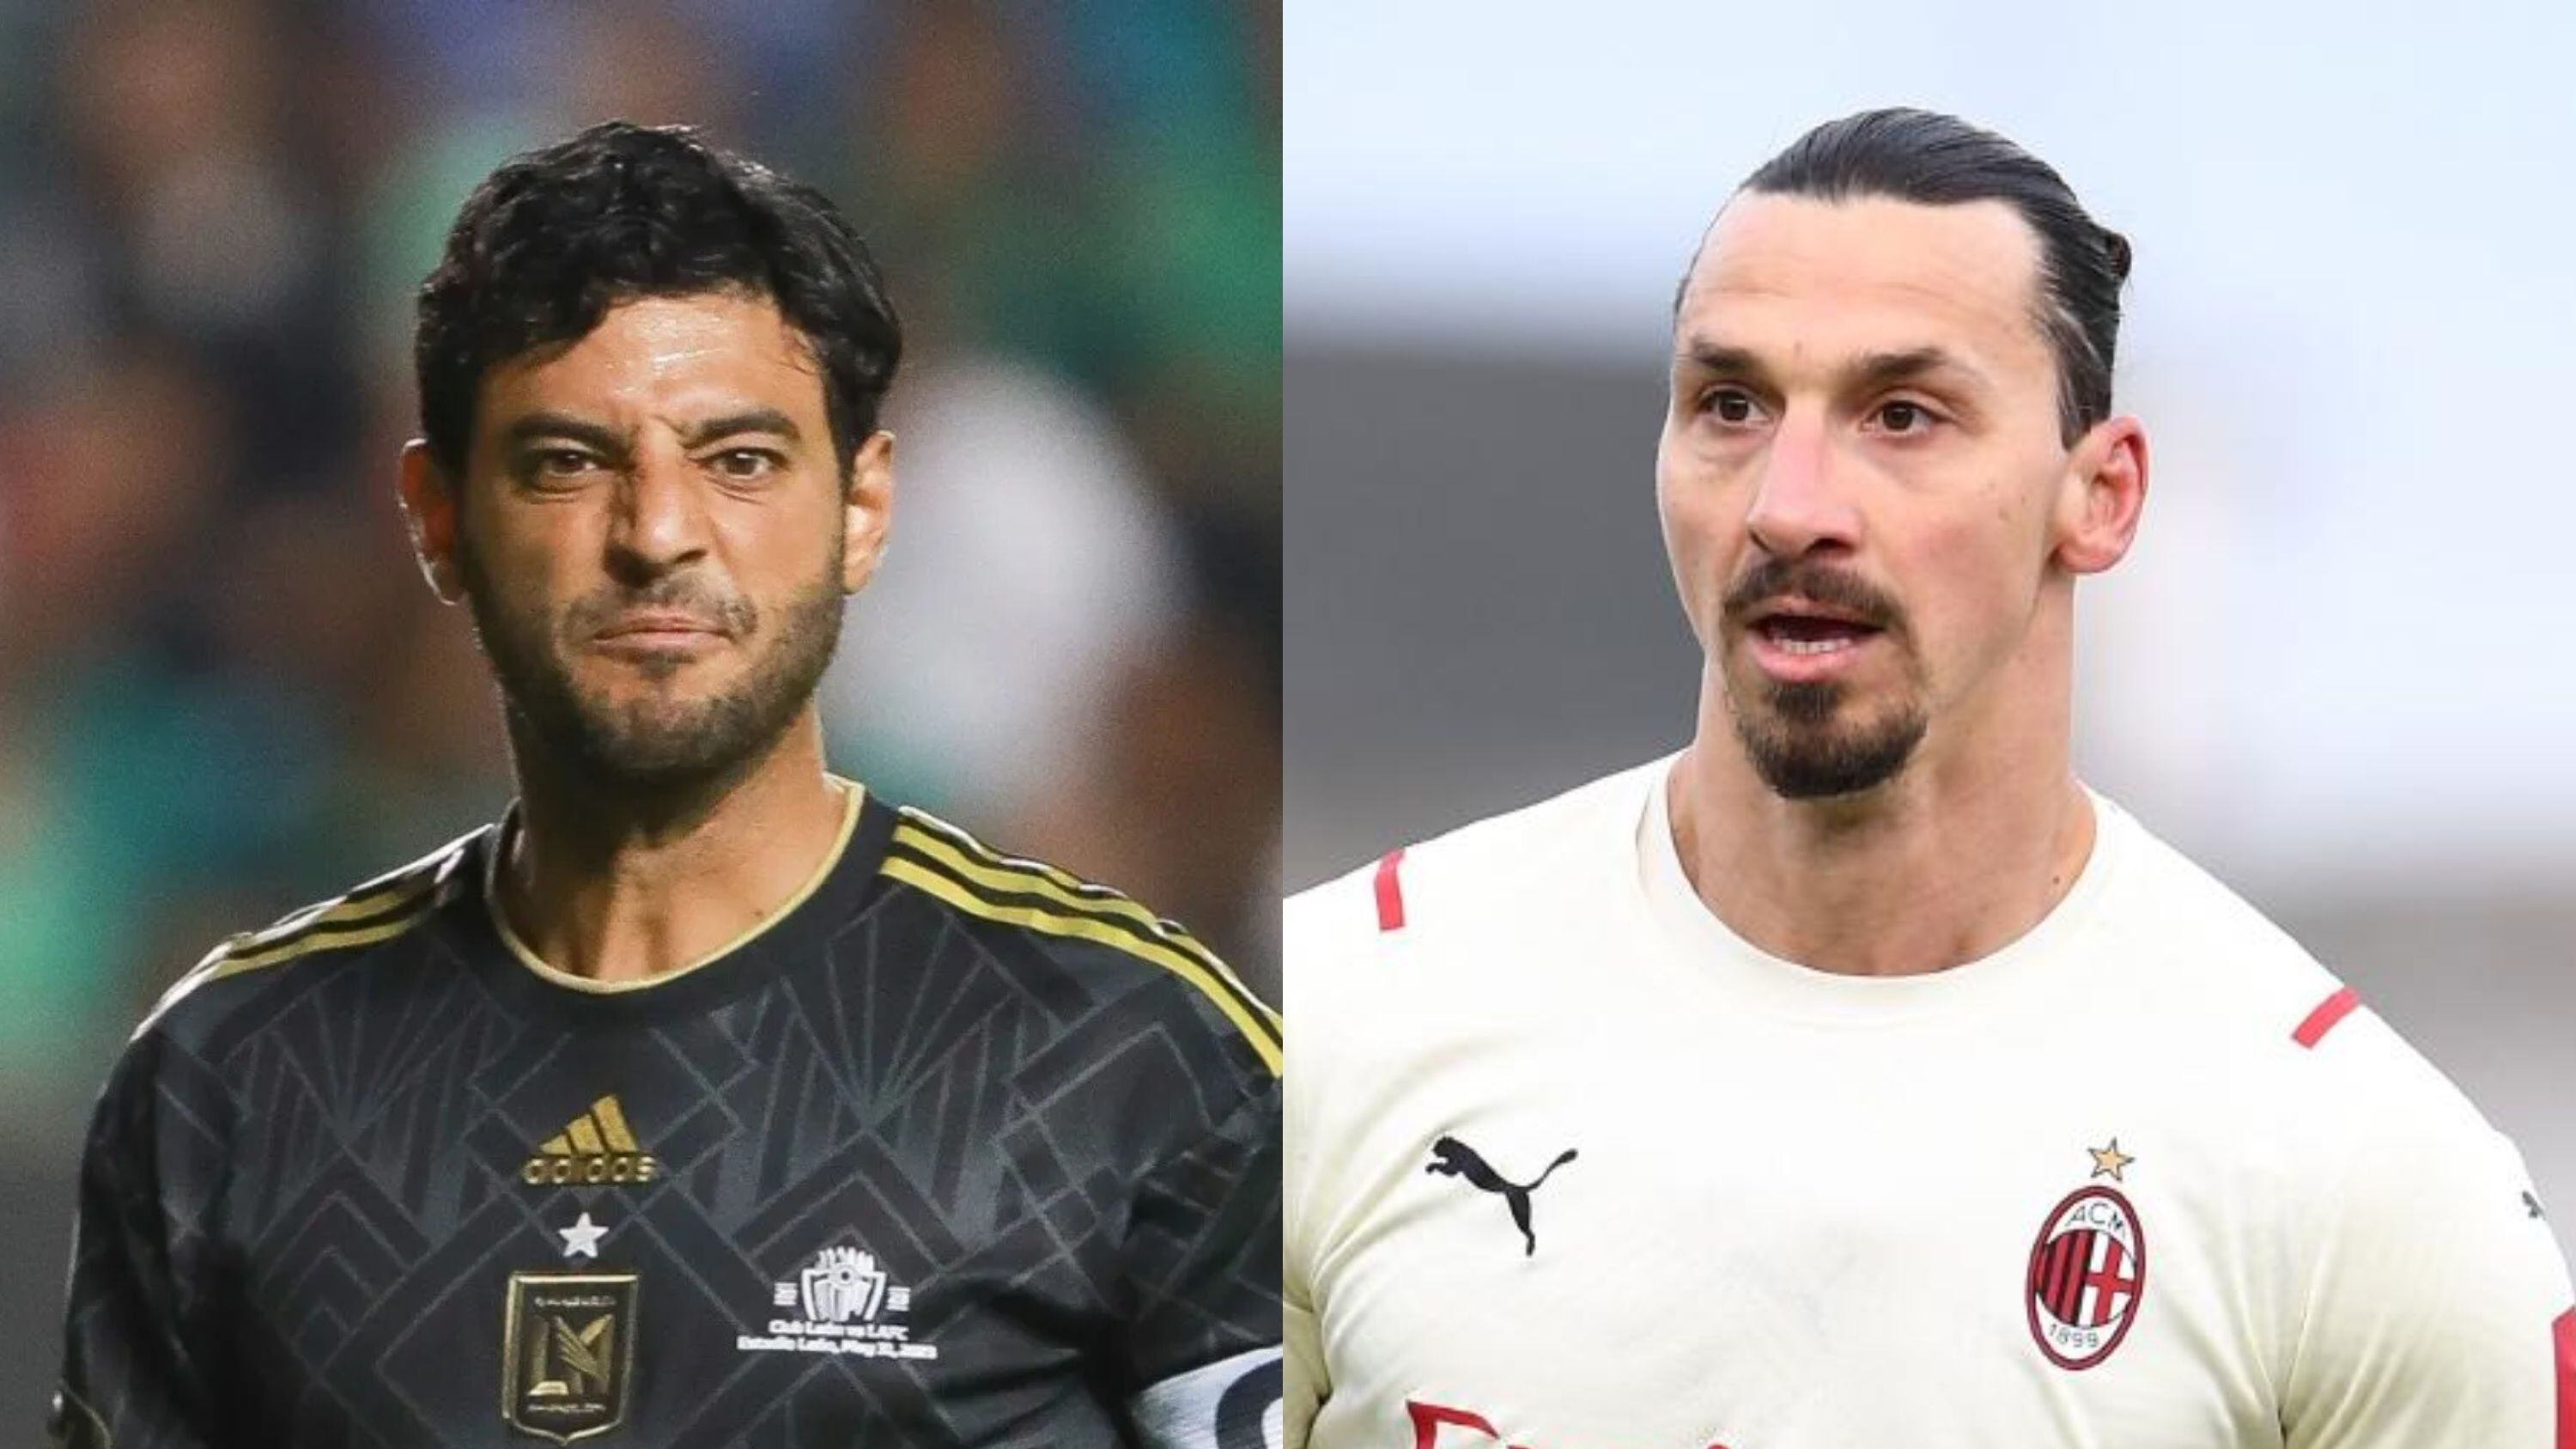 Carlos Vela latest words on Zlatan Ibrahimovic that the Swede will not like